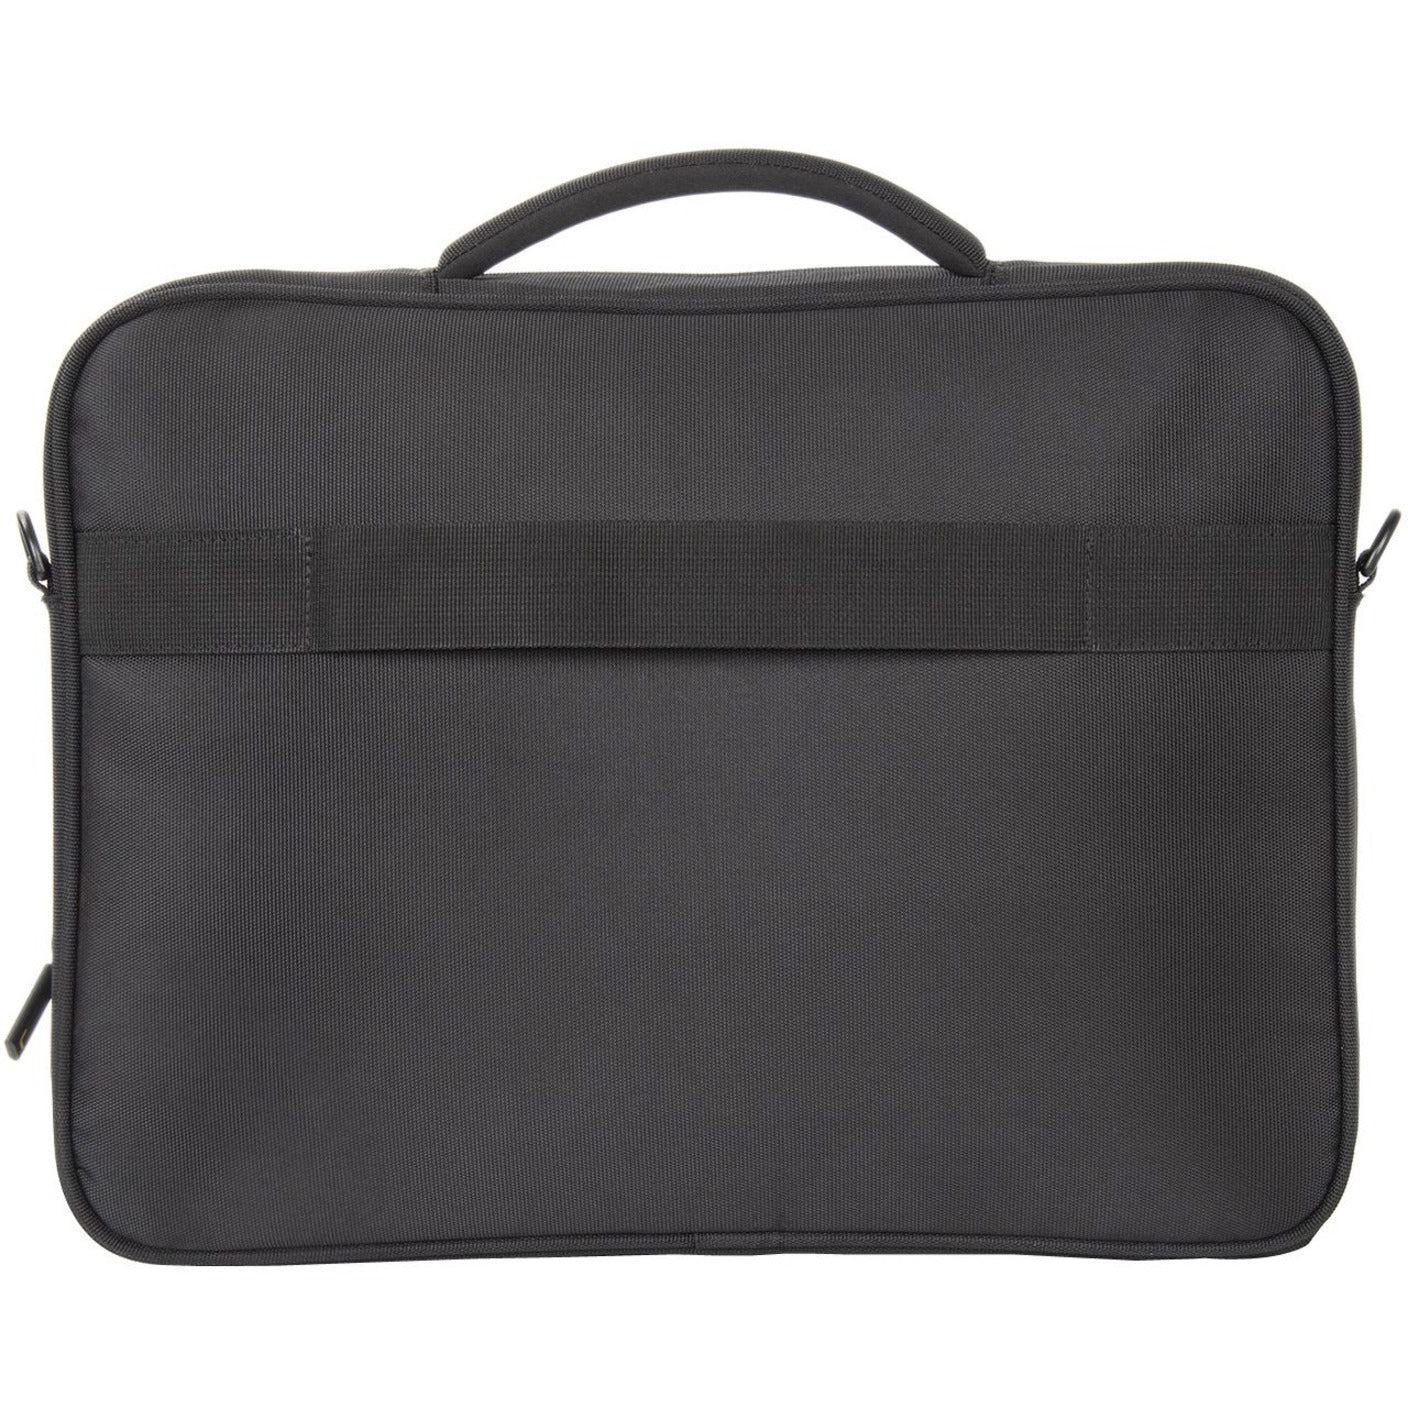 Rocstor Y1CC003-B1 Premium Universal Laptop Carrying Case Frontloading, Fits up to 14.1 Laptop, RFID Pocket